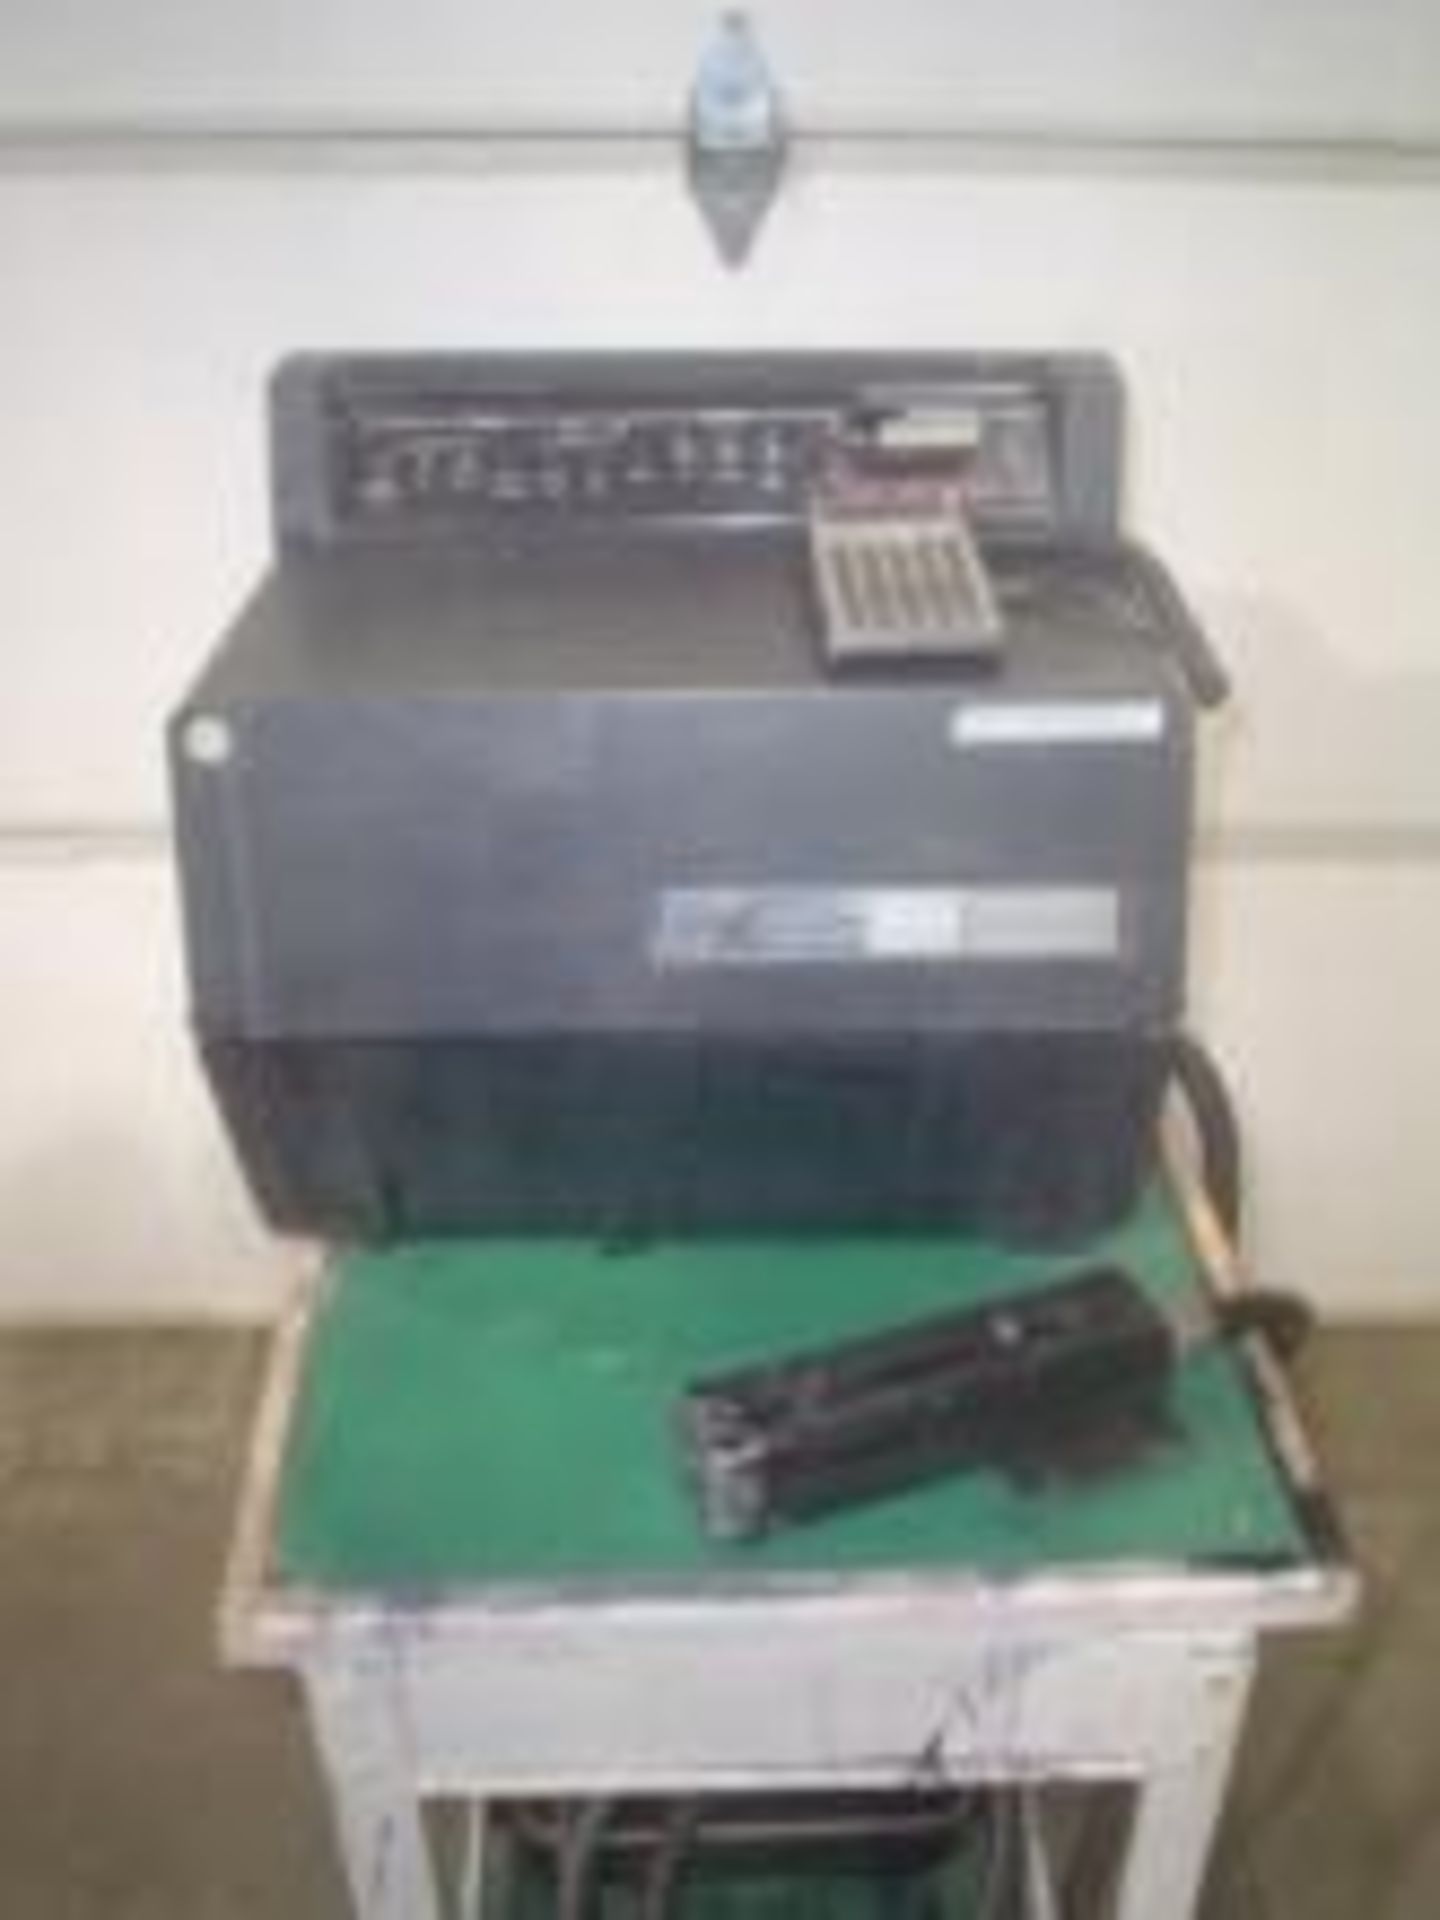 Used Domino Amjet Video Printer.   Electrics: 110 Volts. Load Out Fee:50